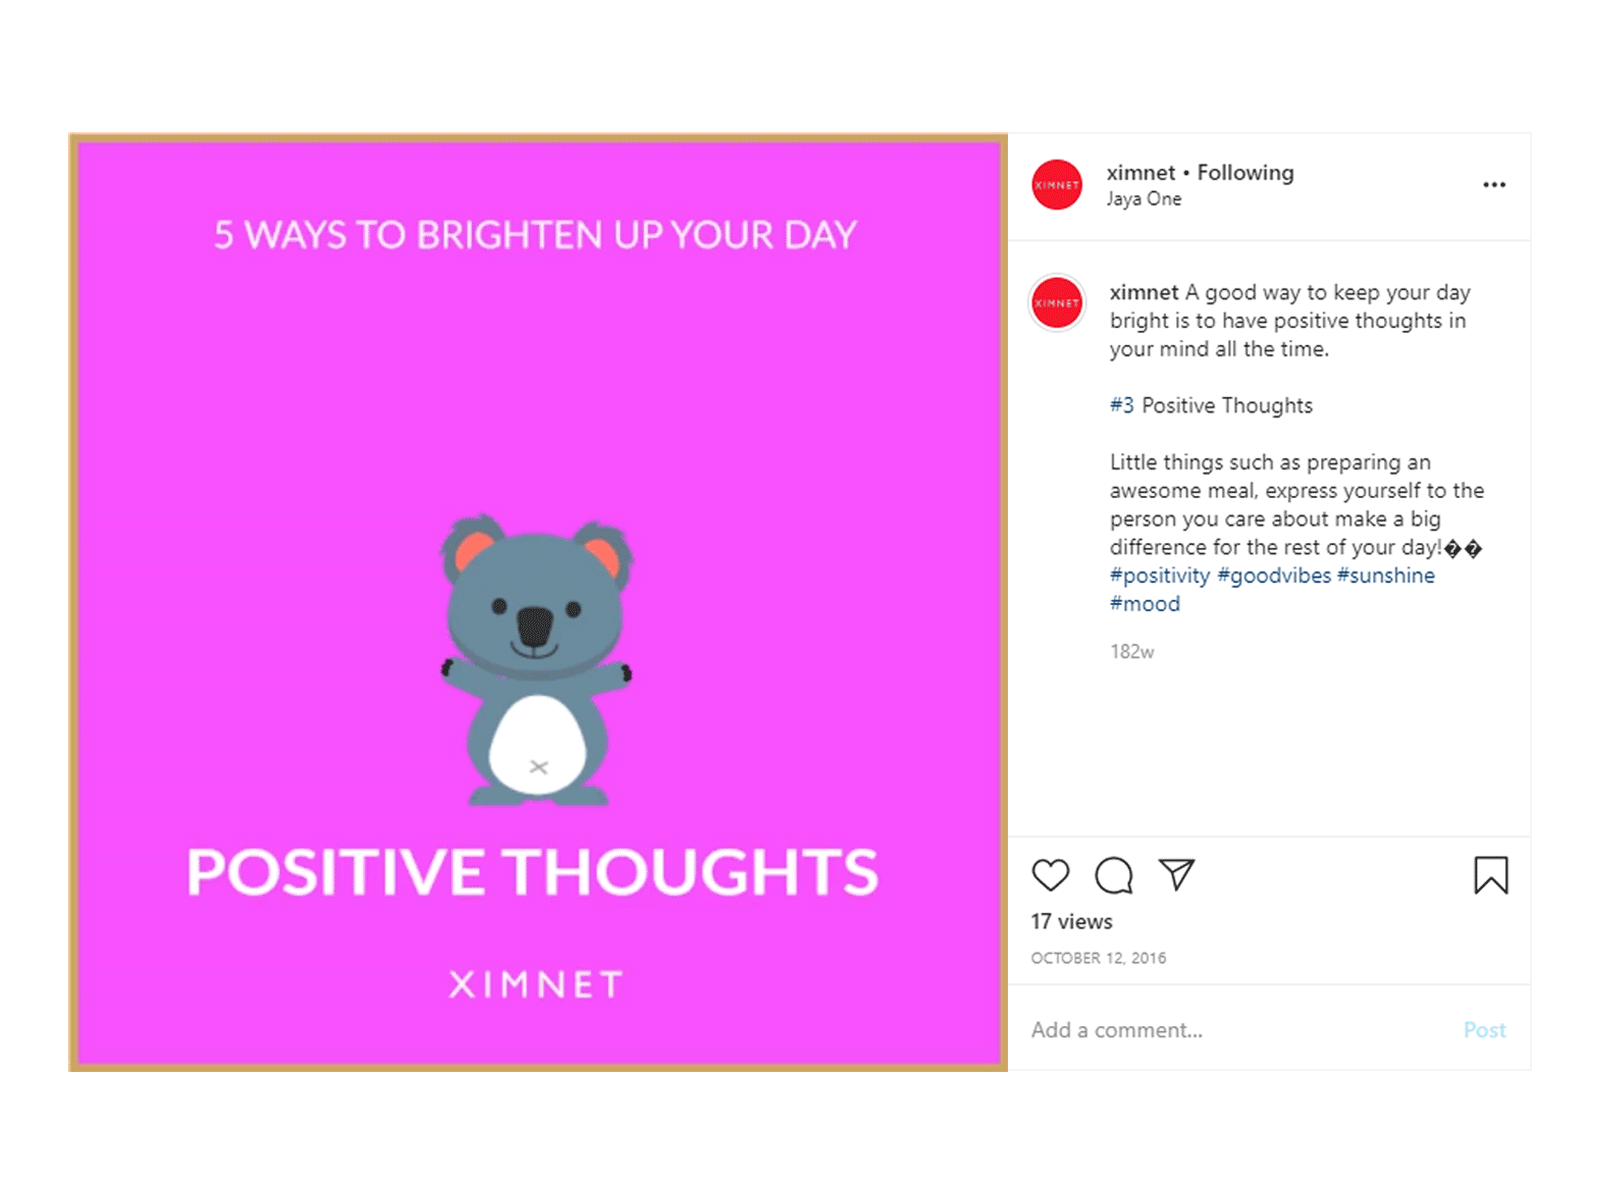 5 Ways To Brighten Up Your Day - Positive Thoughts cute food gif goodvibes illustration koala positivevibes relationship socialmedia travel vector